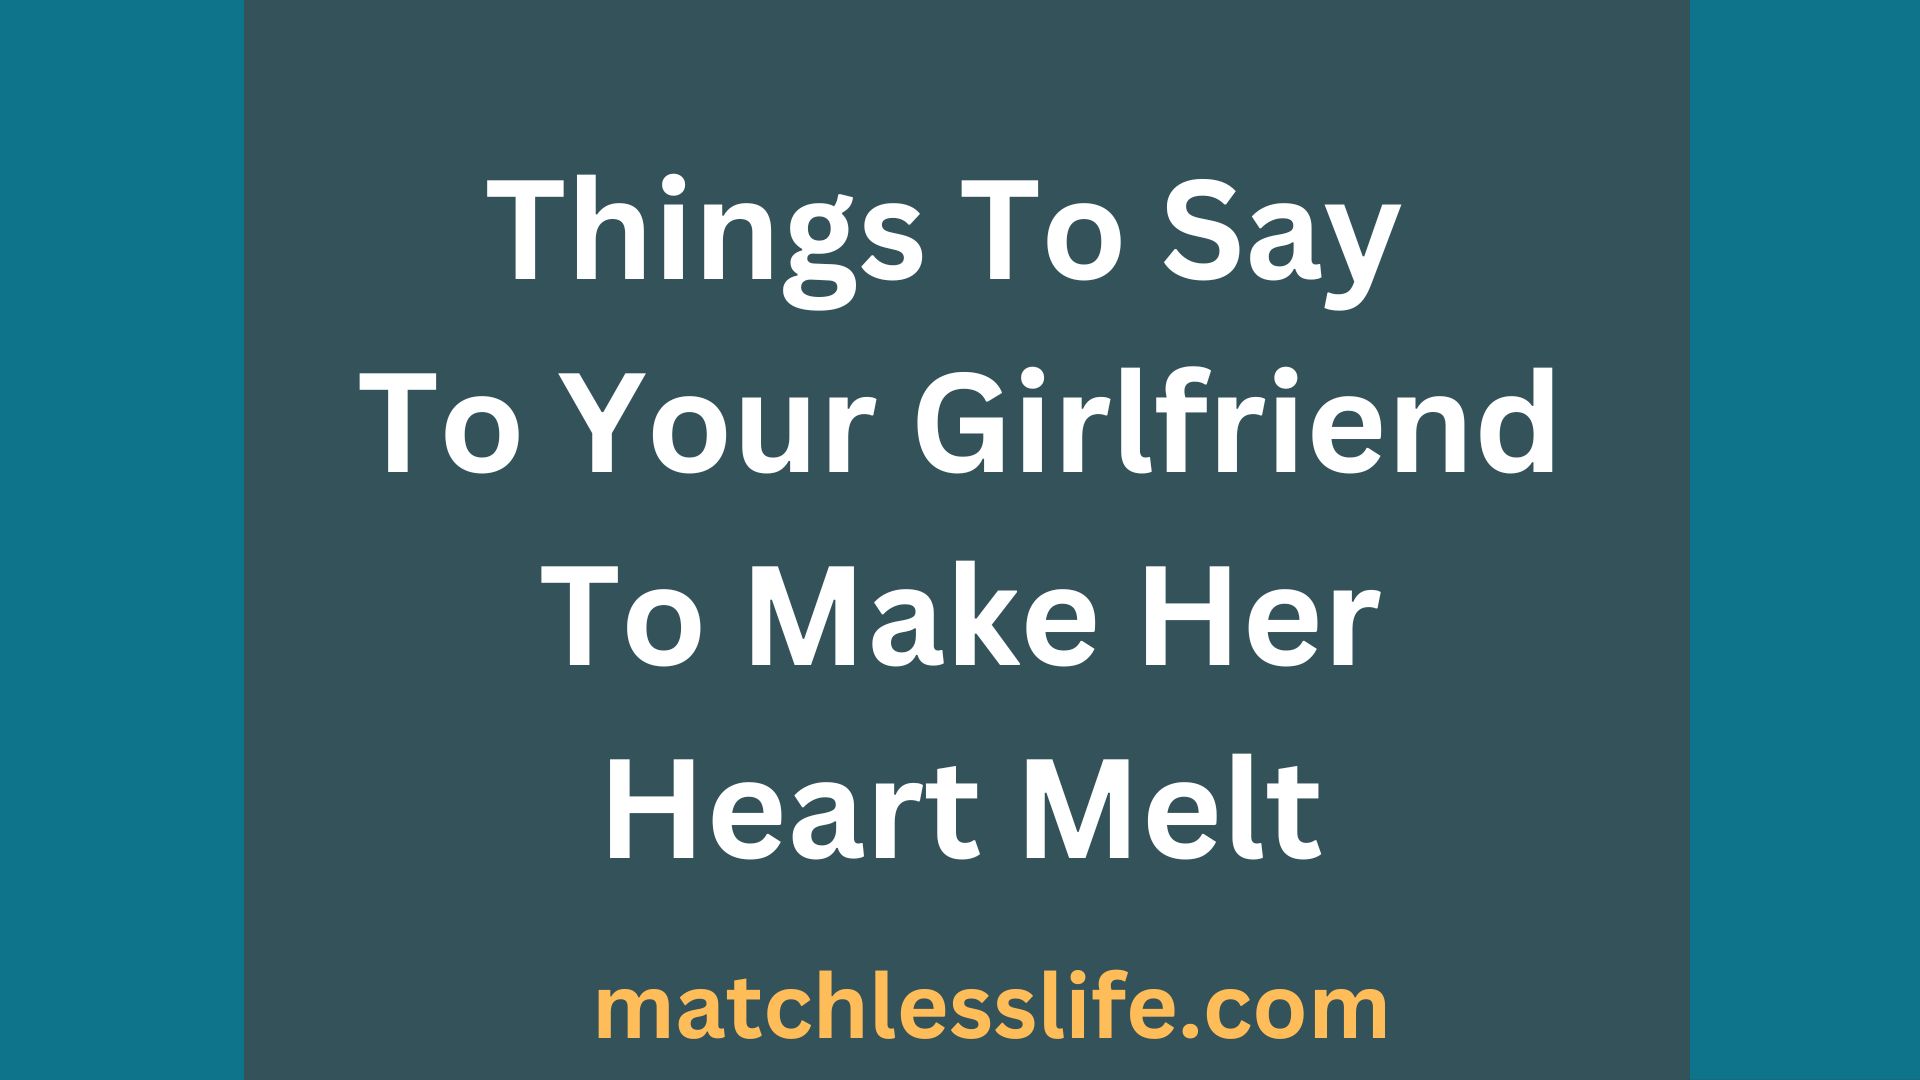 Things To Say To Your Girlfriend To Make Her Heart Melt